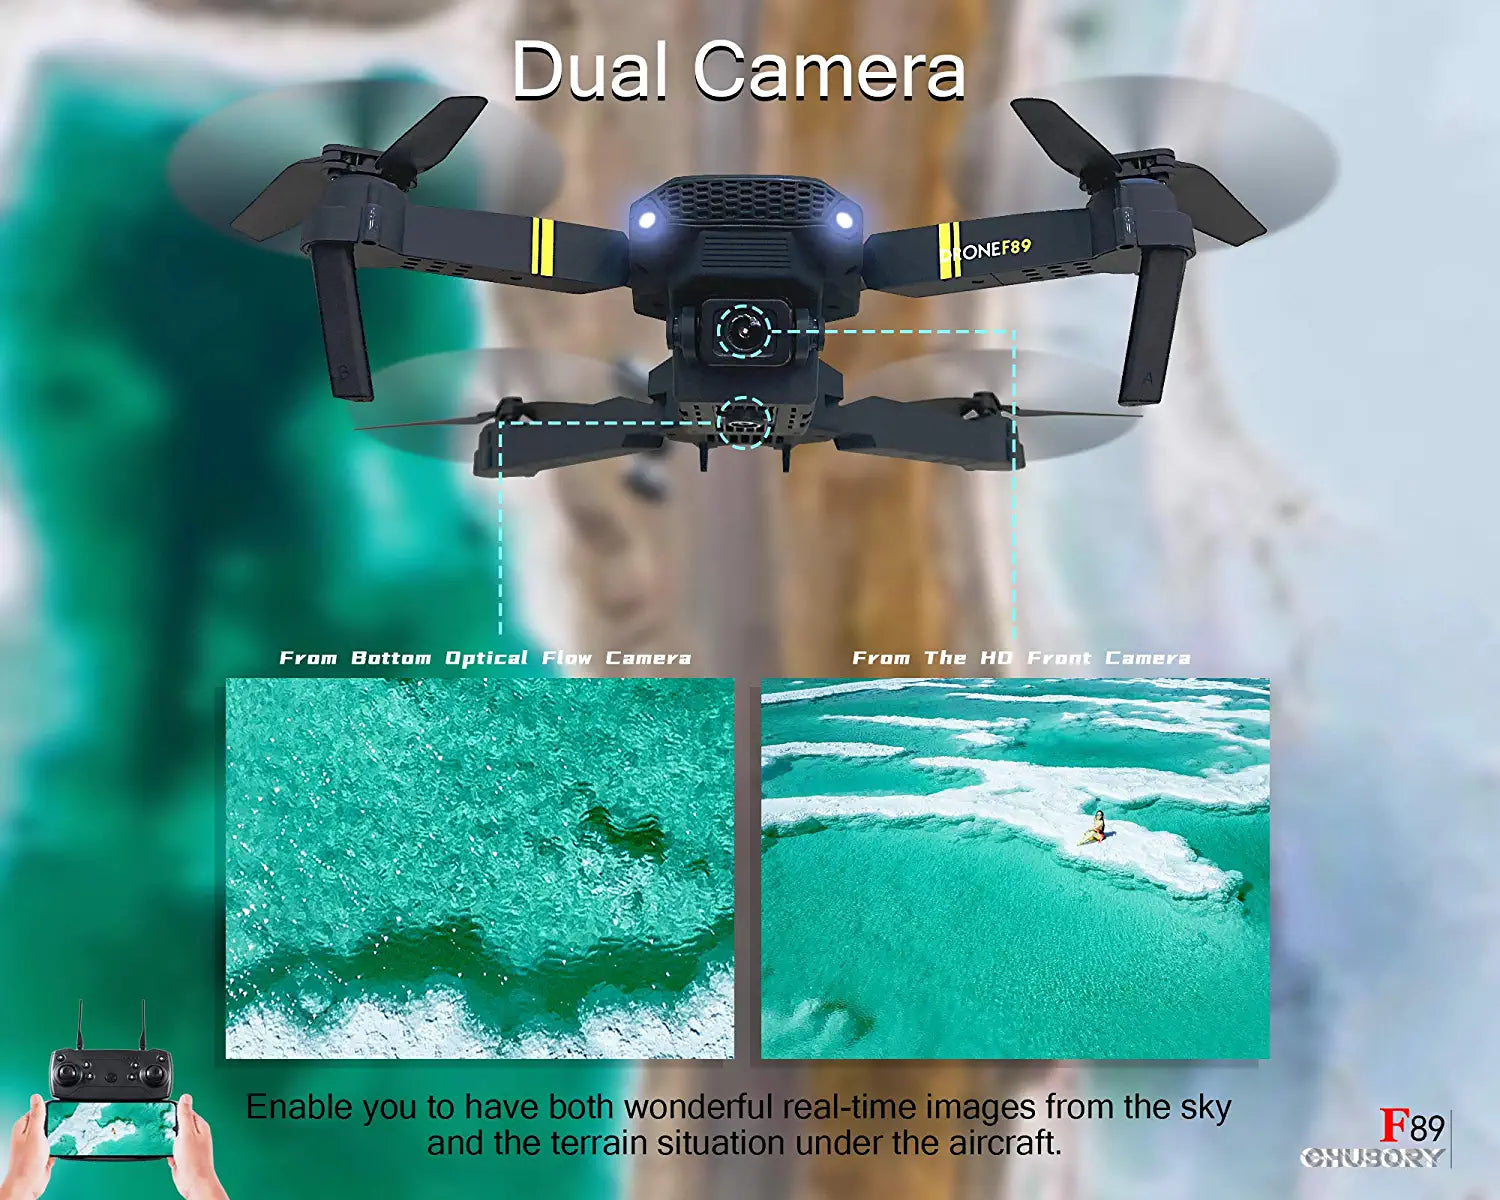 CHUBORY F89 Drone - Super Endurance Foldable Quadcopter Drone for Beginners – 40+ mins Flight Time,Wi-Fi FPV Drone with 120°Wide-Angle 1080P HD Camera,Optical Flow Positioning,Follow me,Dual Cameras Switch - RCDrone